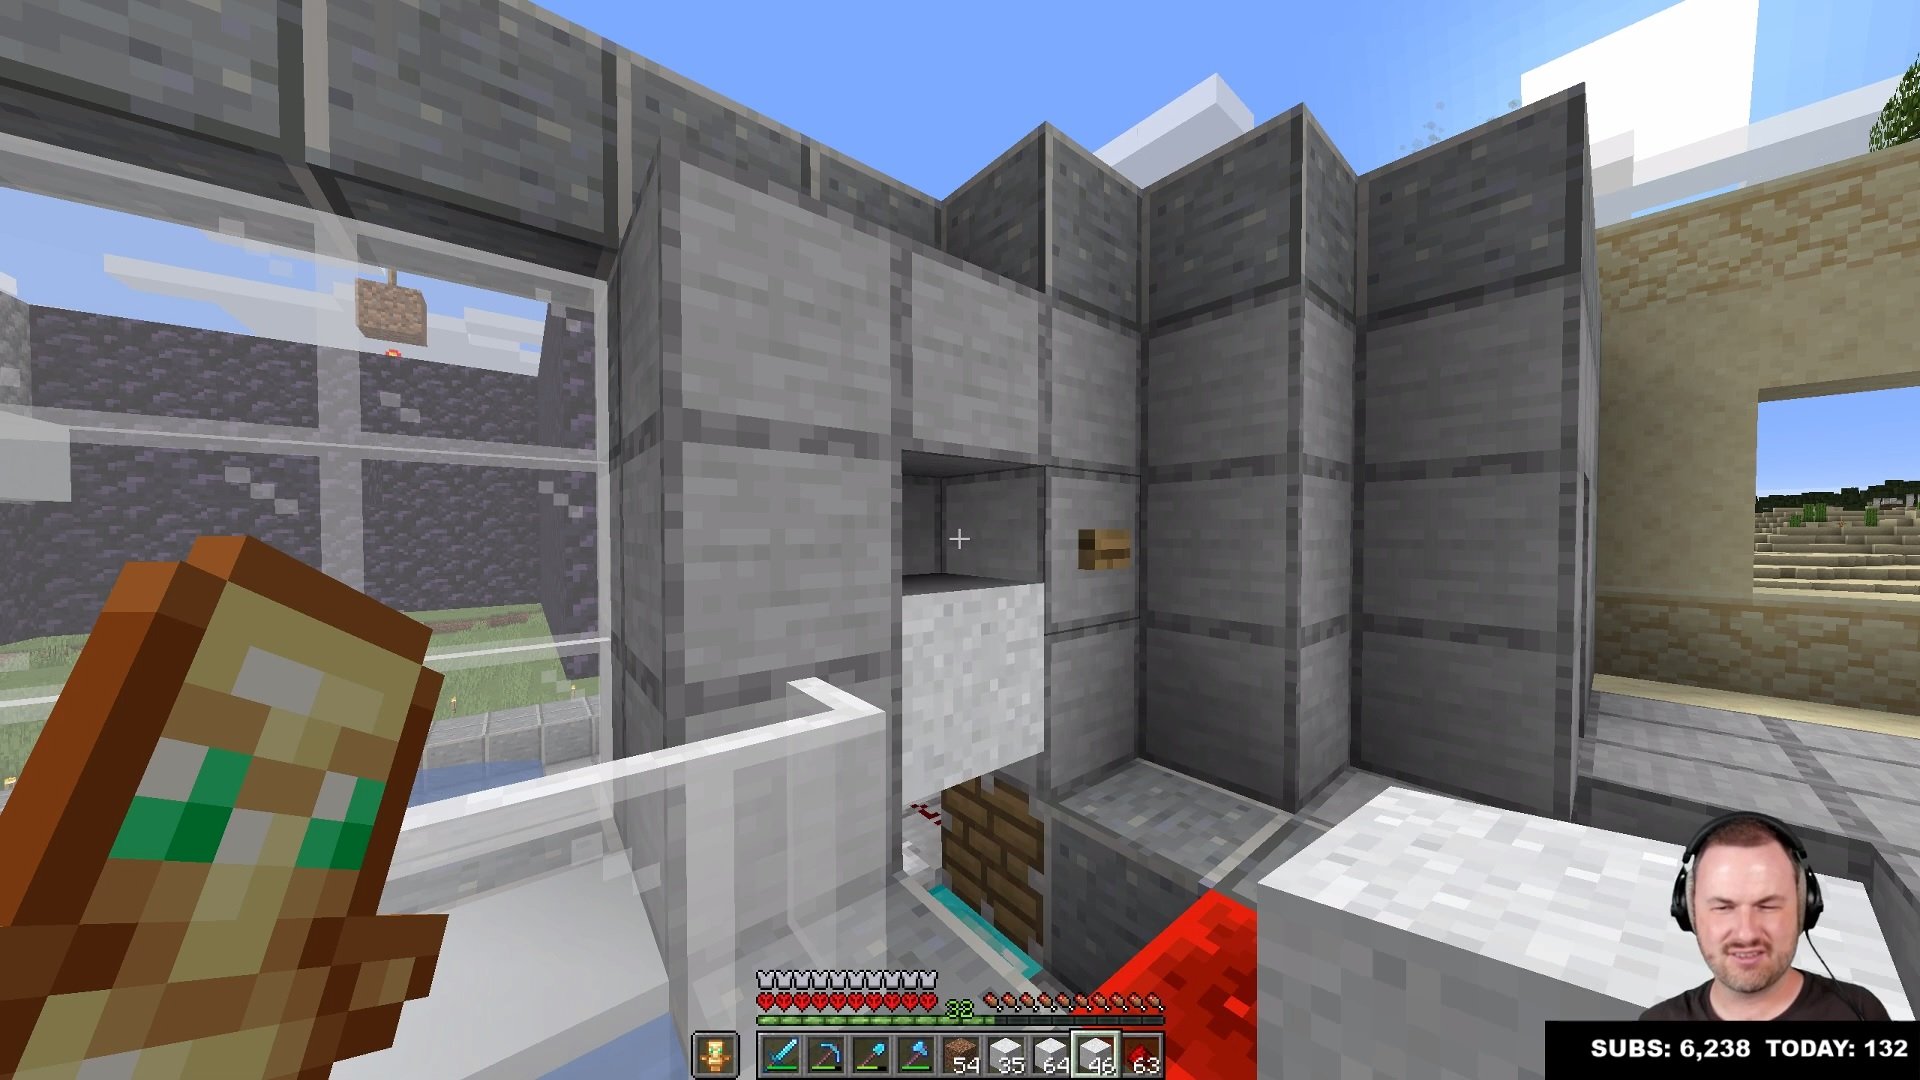 Sips Makes Concrete Machine Work In Minecraft In Just Two Days